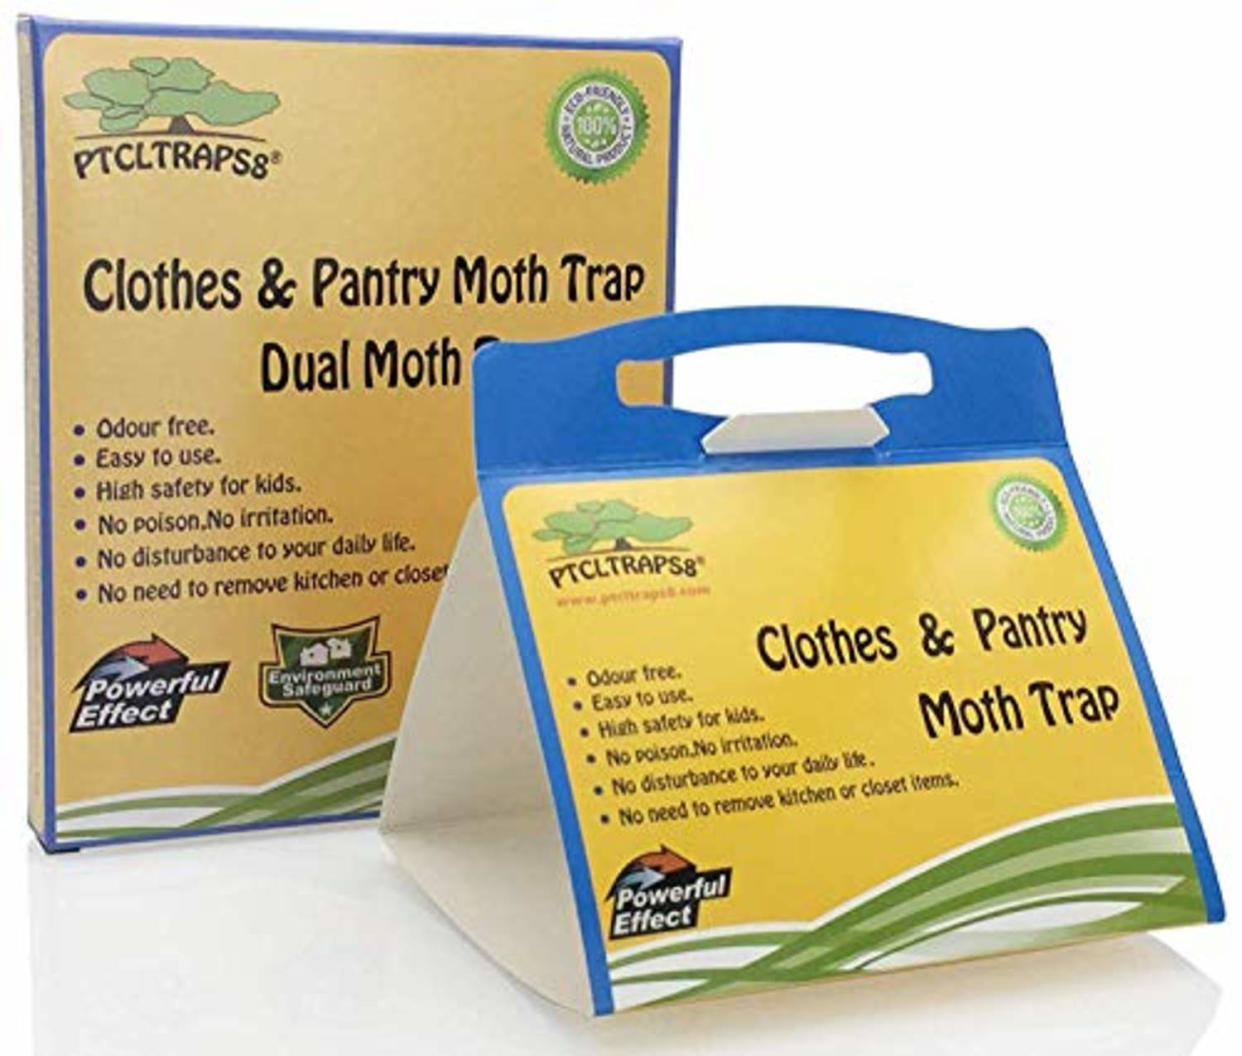 Dual Moth Traps for Clothes and Pantry Highly Effective All-Around Moth Traps,Pro Cloest Essentials Get Rid of Wool Moths with Natural Safe and Odor-Free Dual Premium Pheromone (AMAZON)